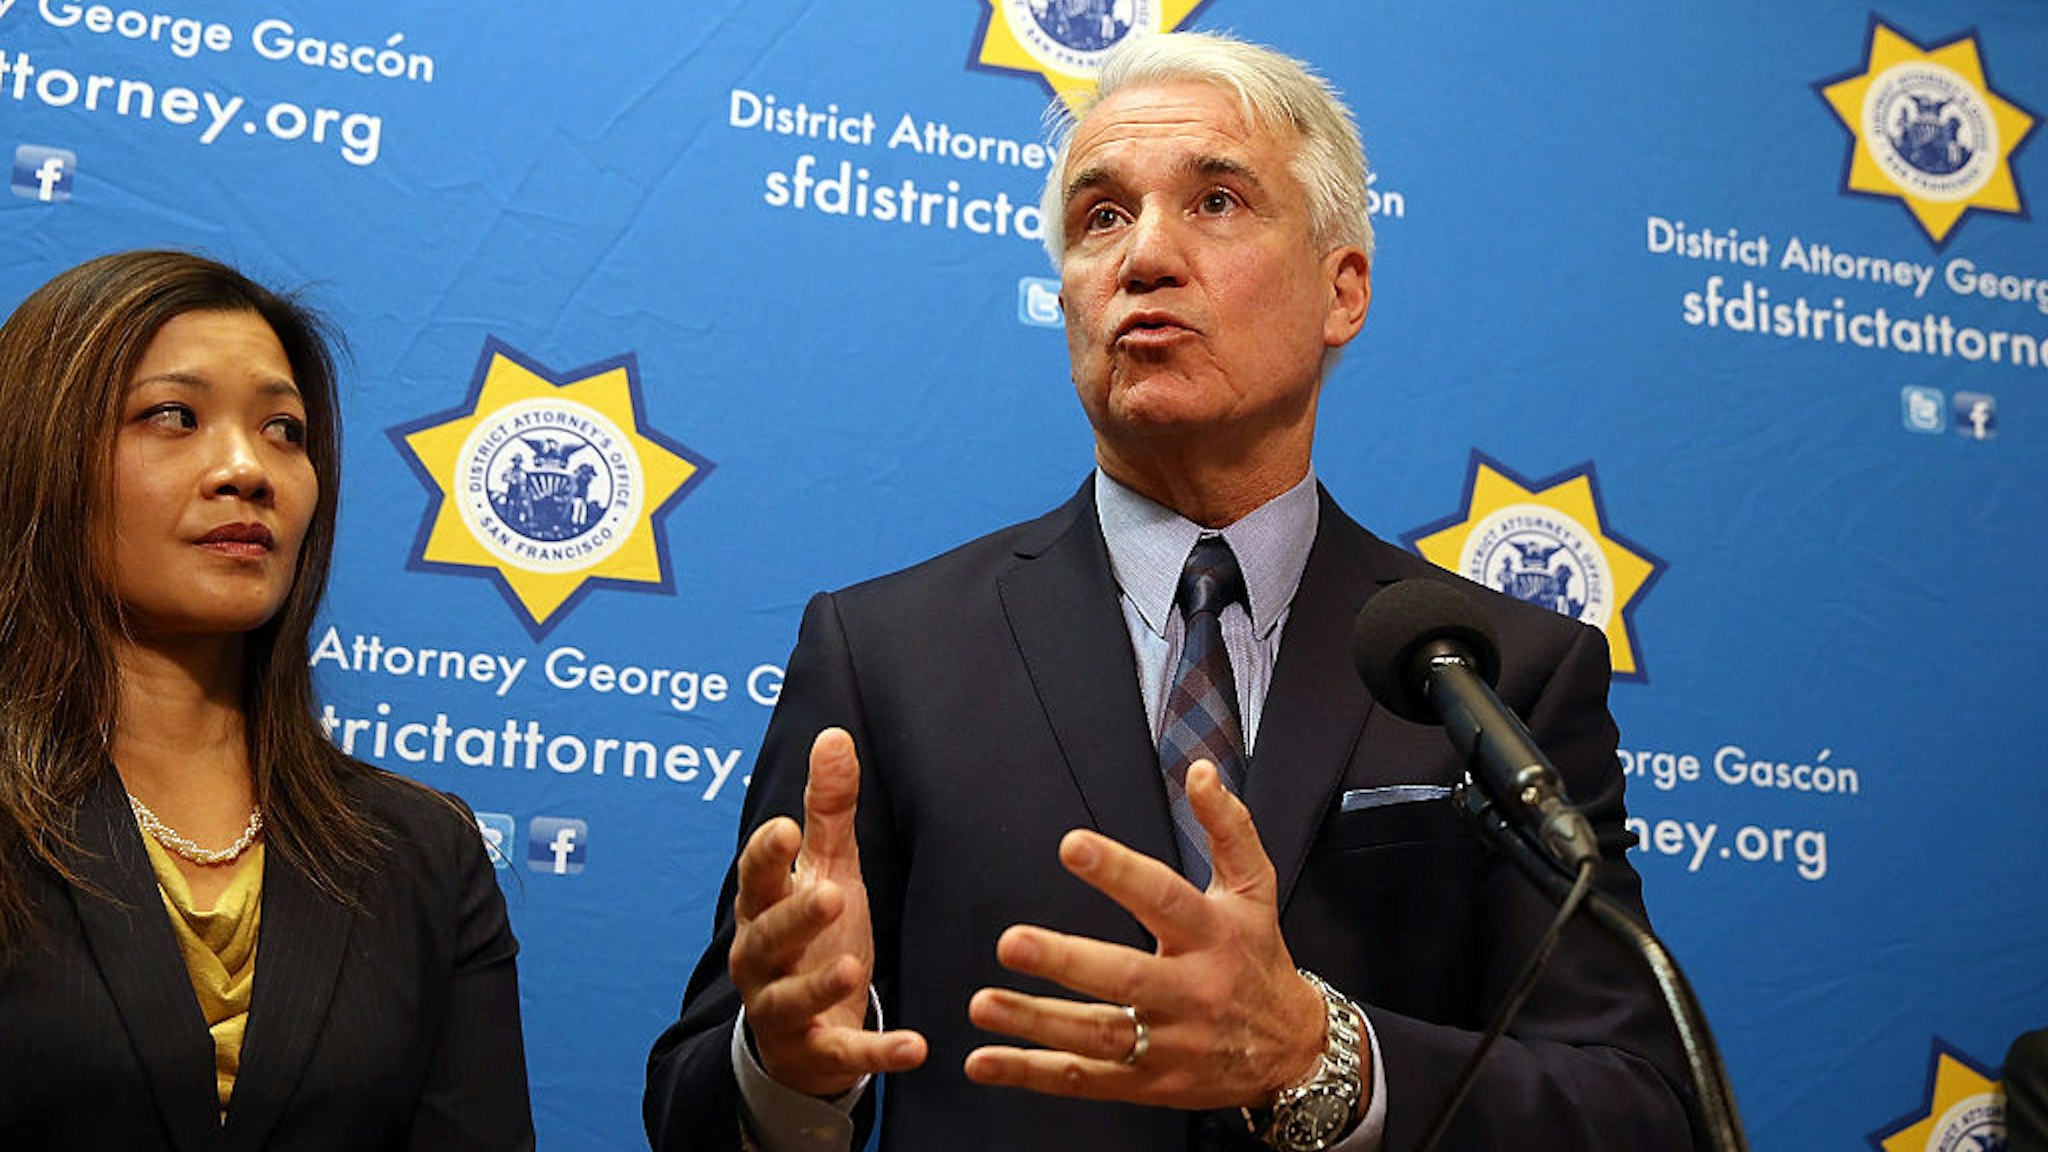 San Francisco district attorney George Gascon speaks during a new conference to announce a civil consumer protection action against rideshare company Uber on December 9, 2014 in San Francisco, California.